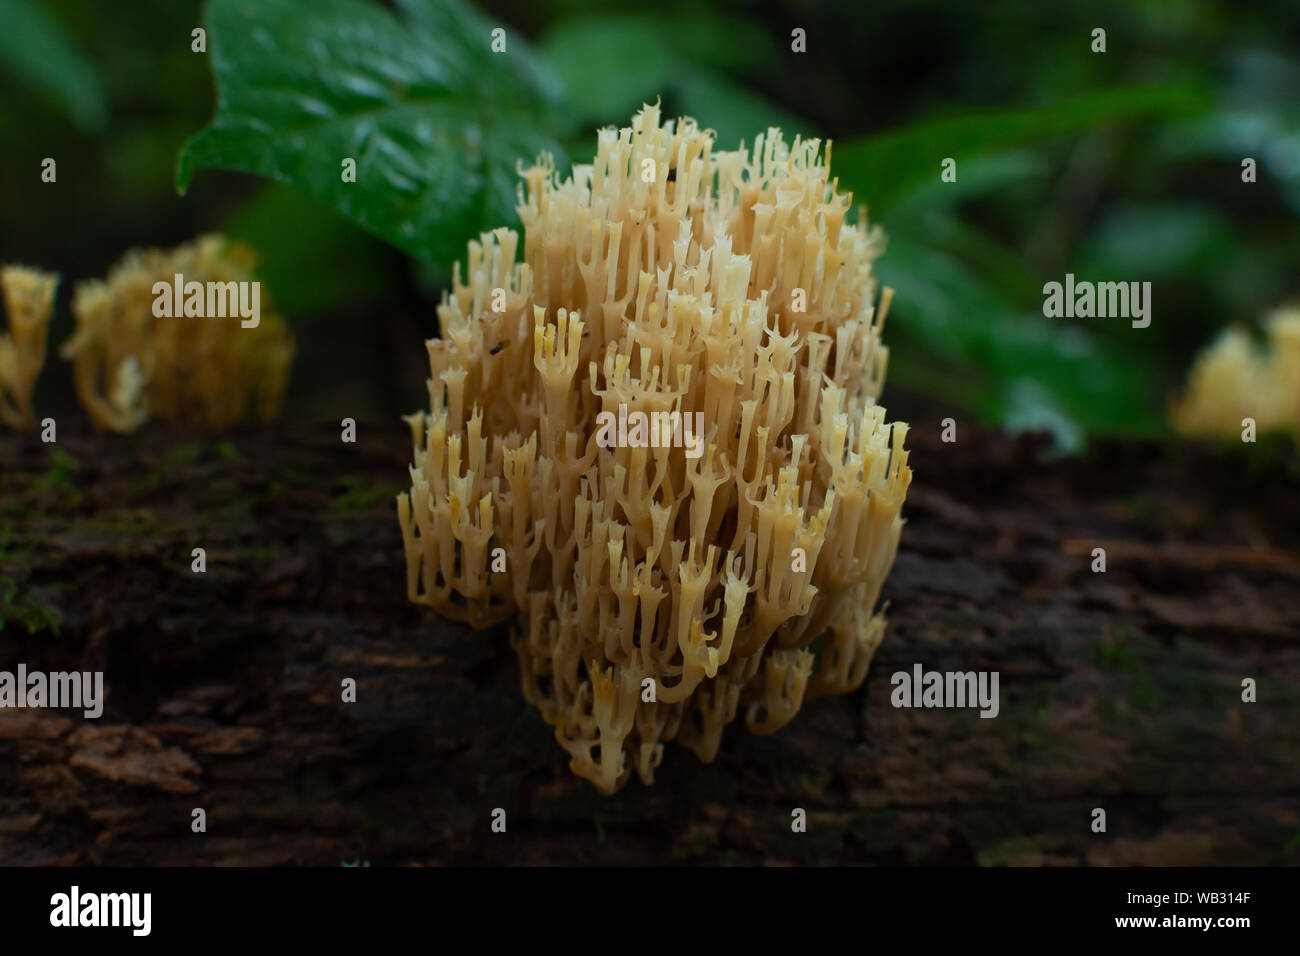 Coral mushrooms growing on fallen tree.  Castle Rock State Park, Illinois, USA Stock Photo